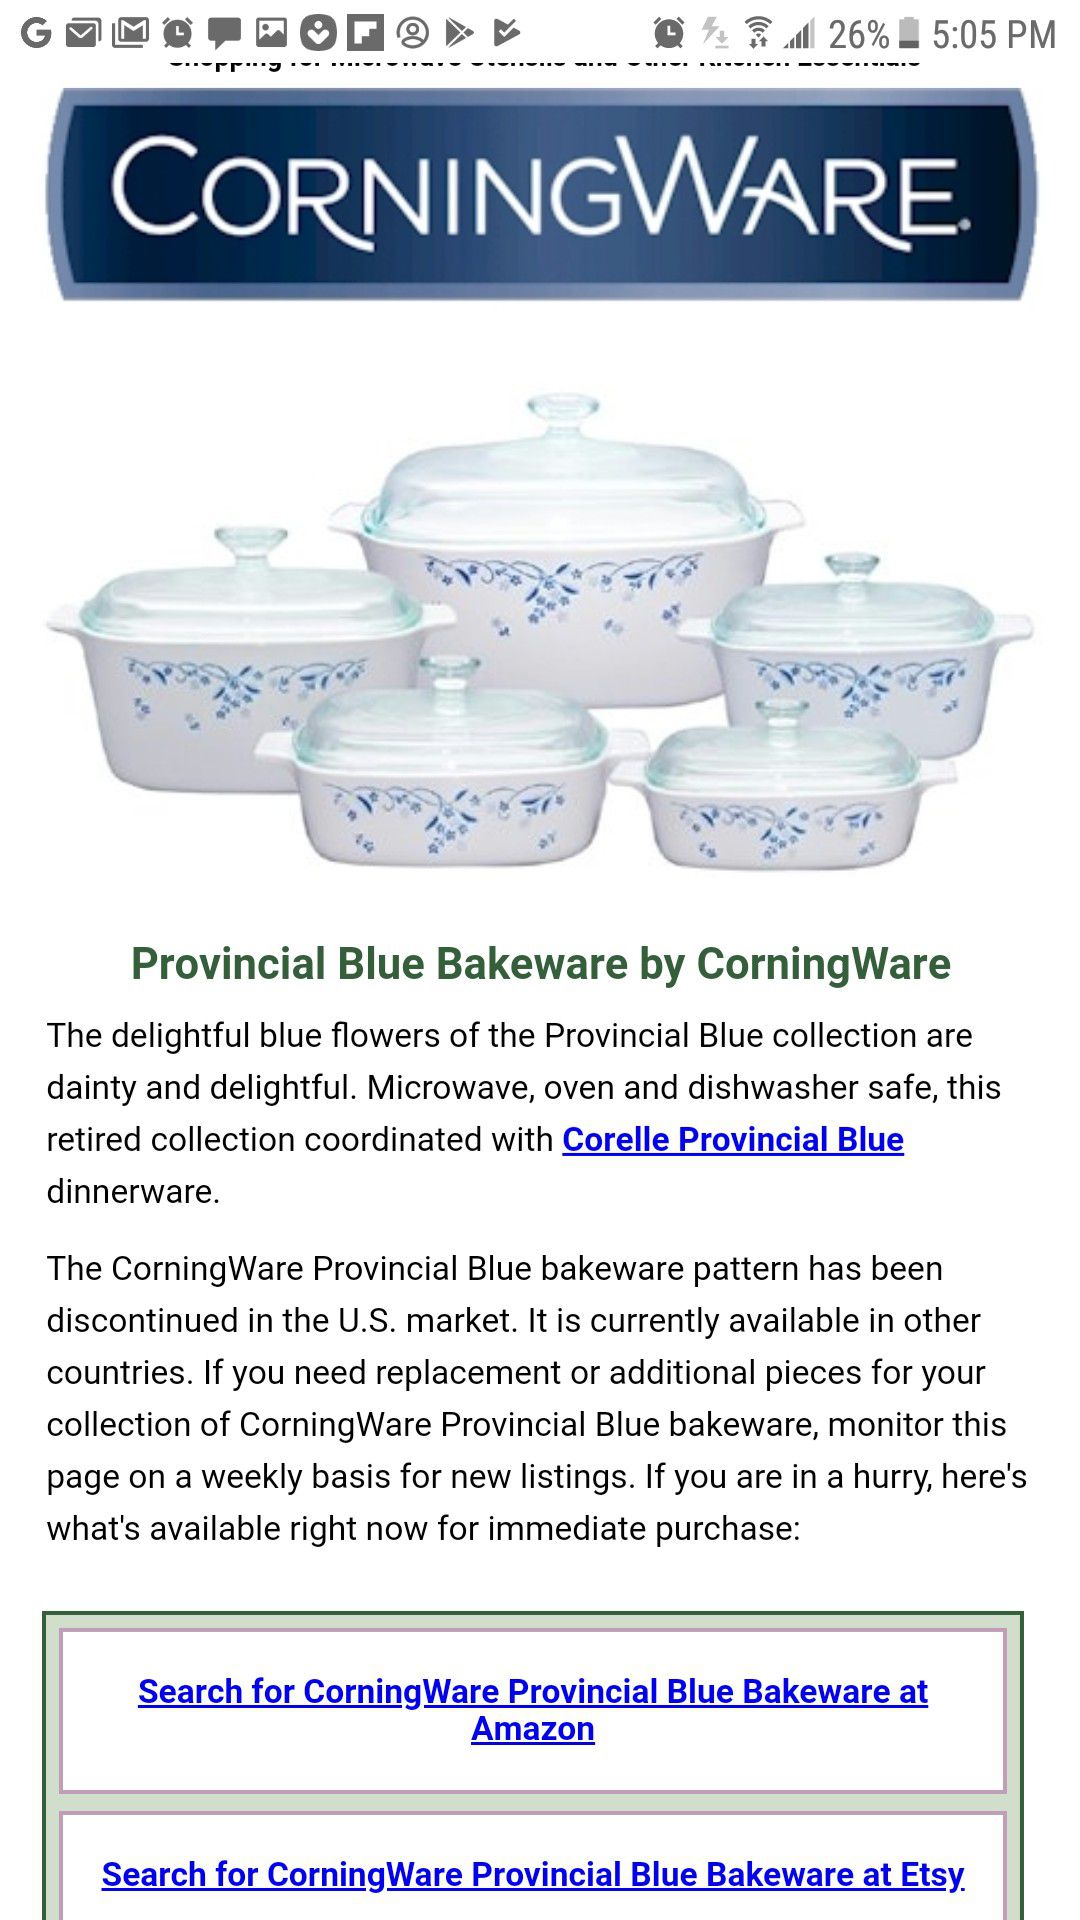 RARE AND RETIRED CORNINGWARE PYREX PROVINCIAL BLUE 5L COVERED CASSEROLE DISH